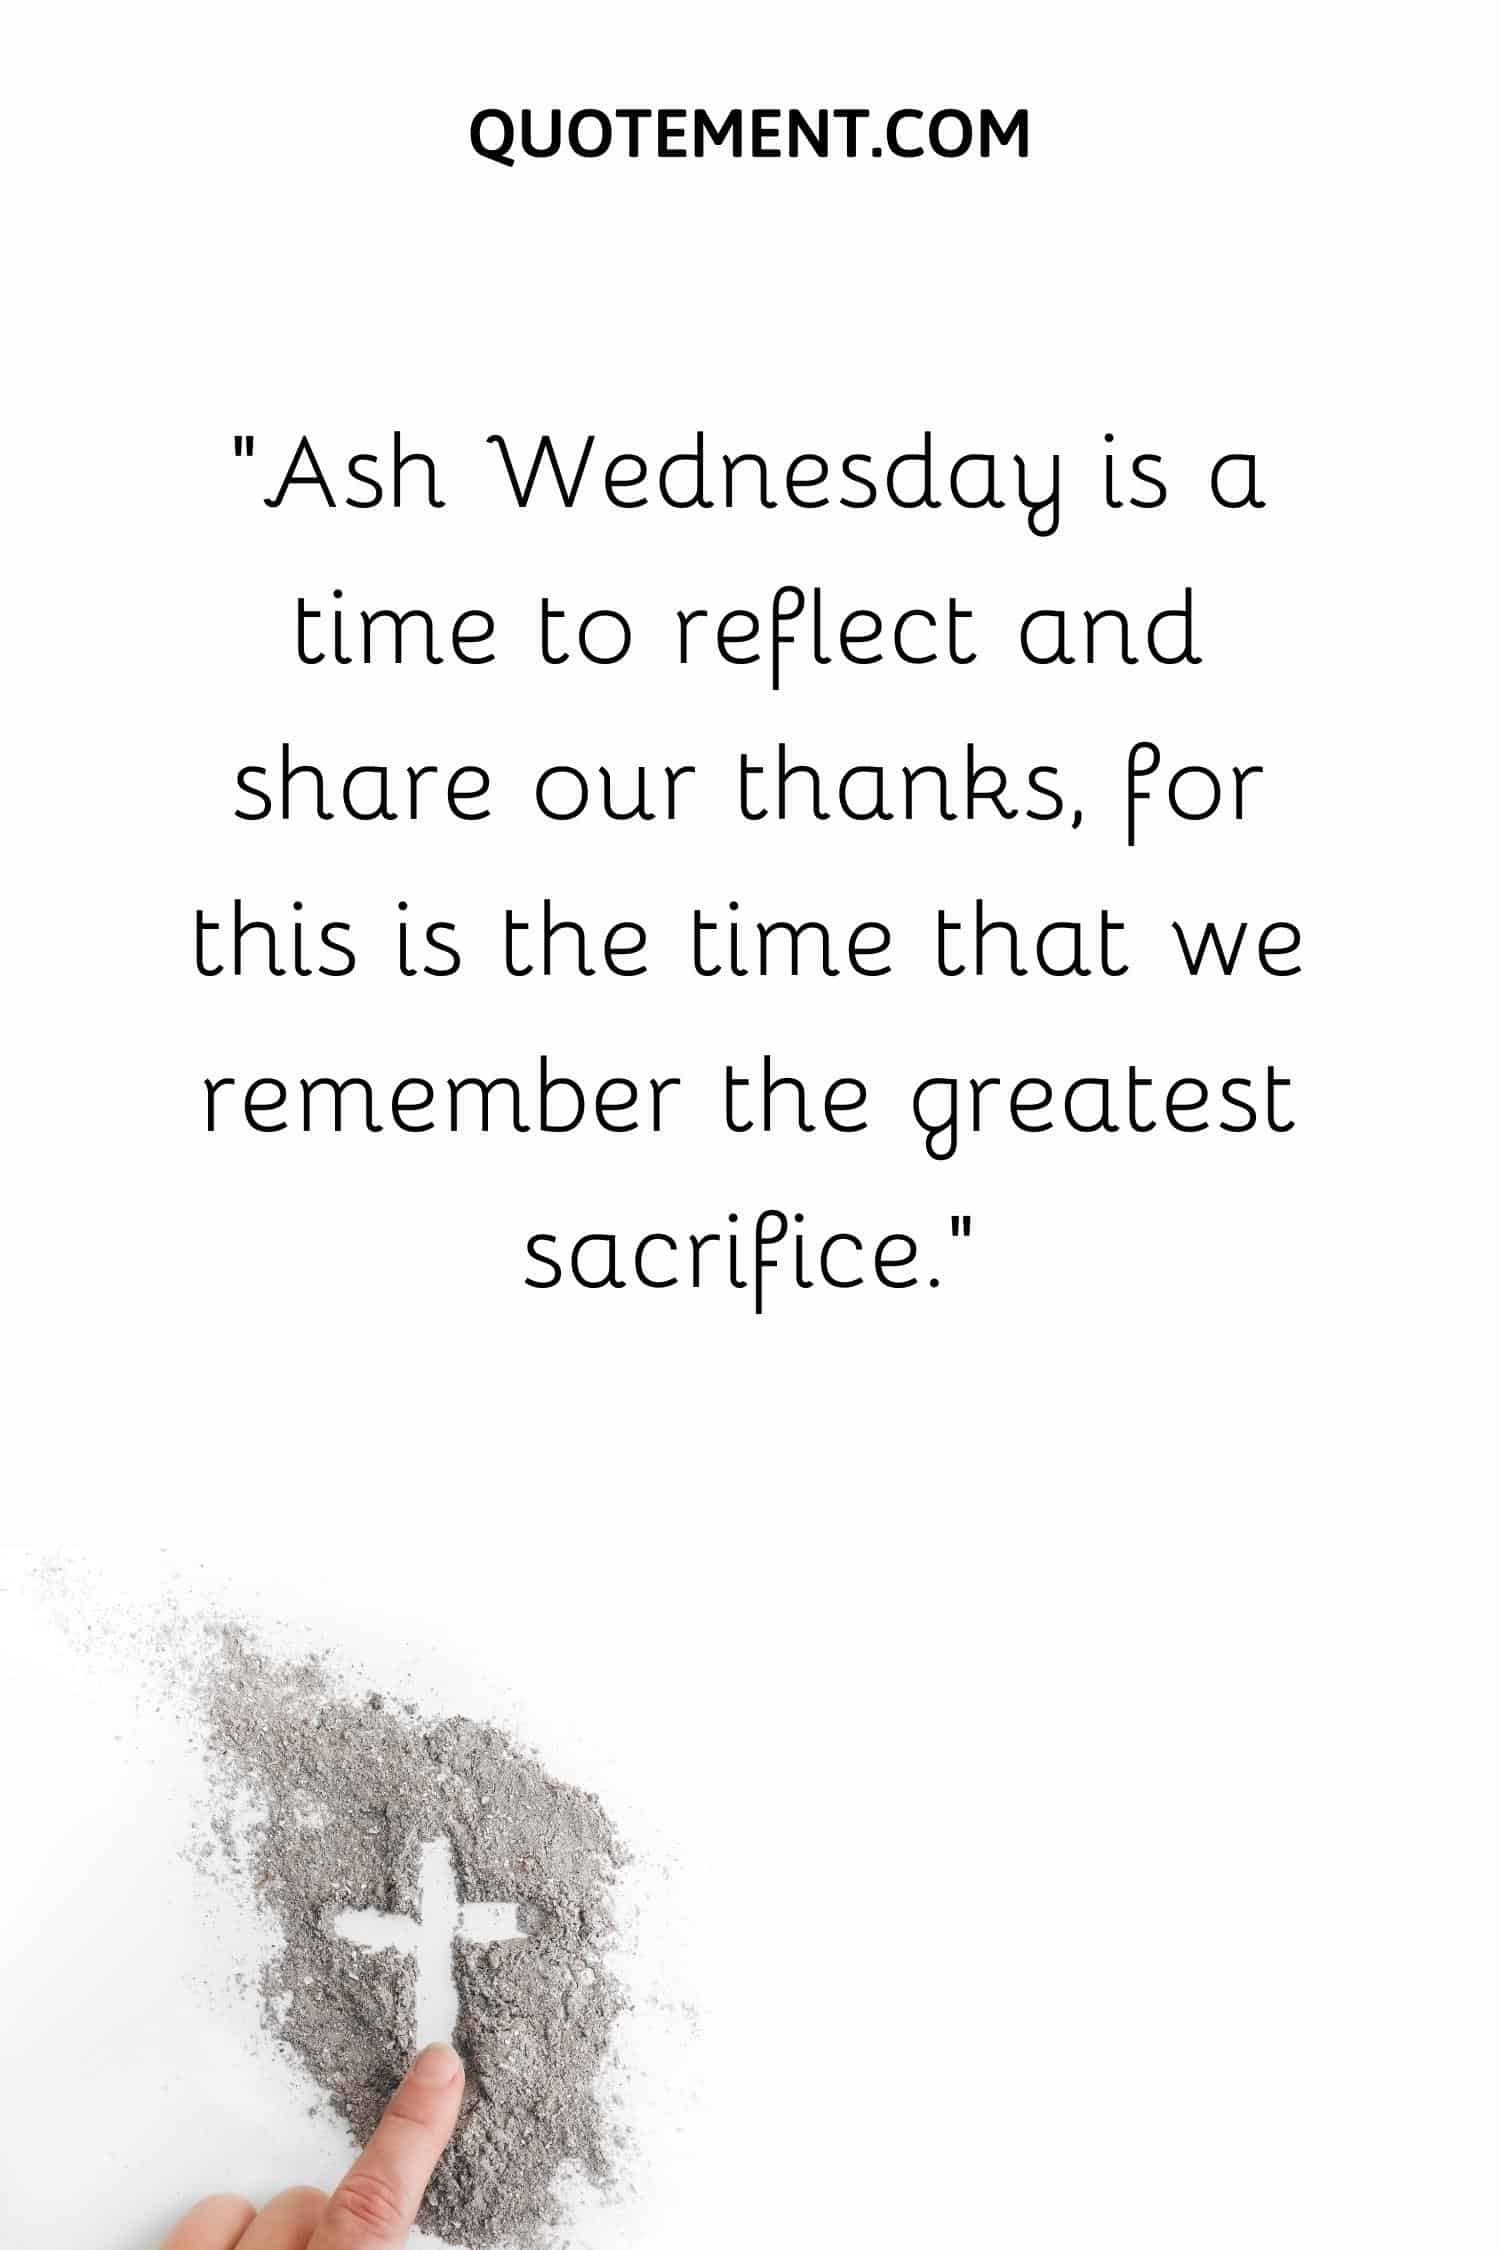 Ash Wednesday is a time to reflect and share our thanks, for this is the time that we remember the greatest sacrifice